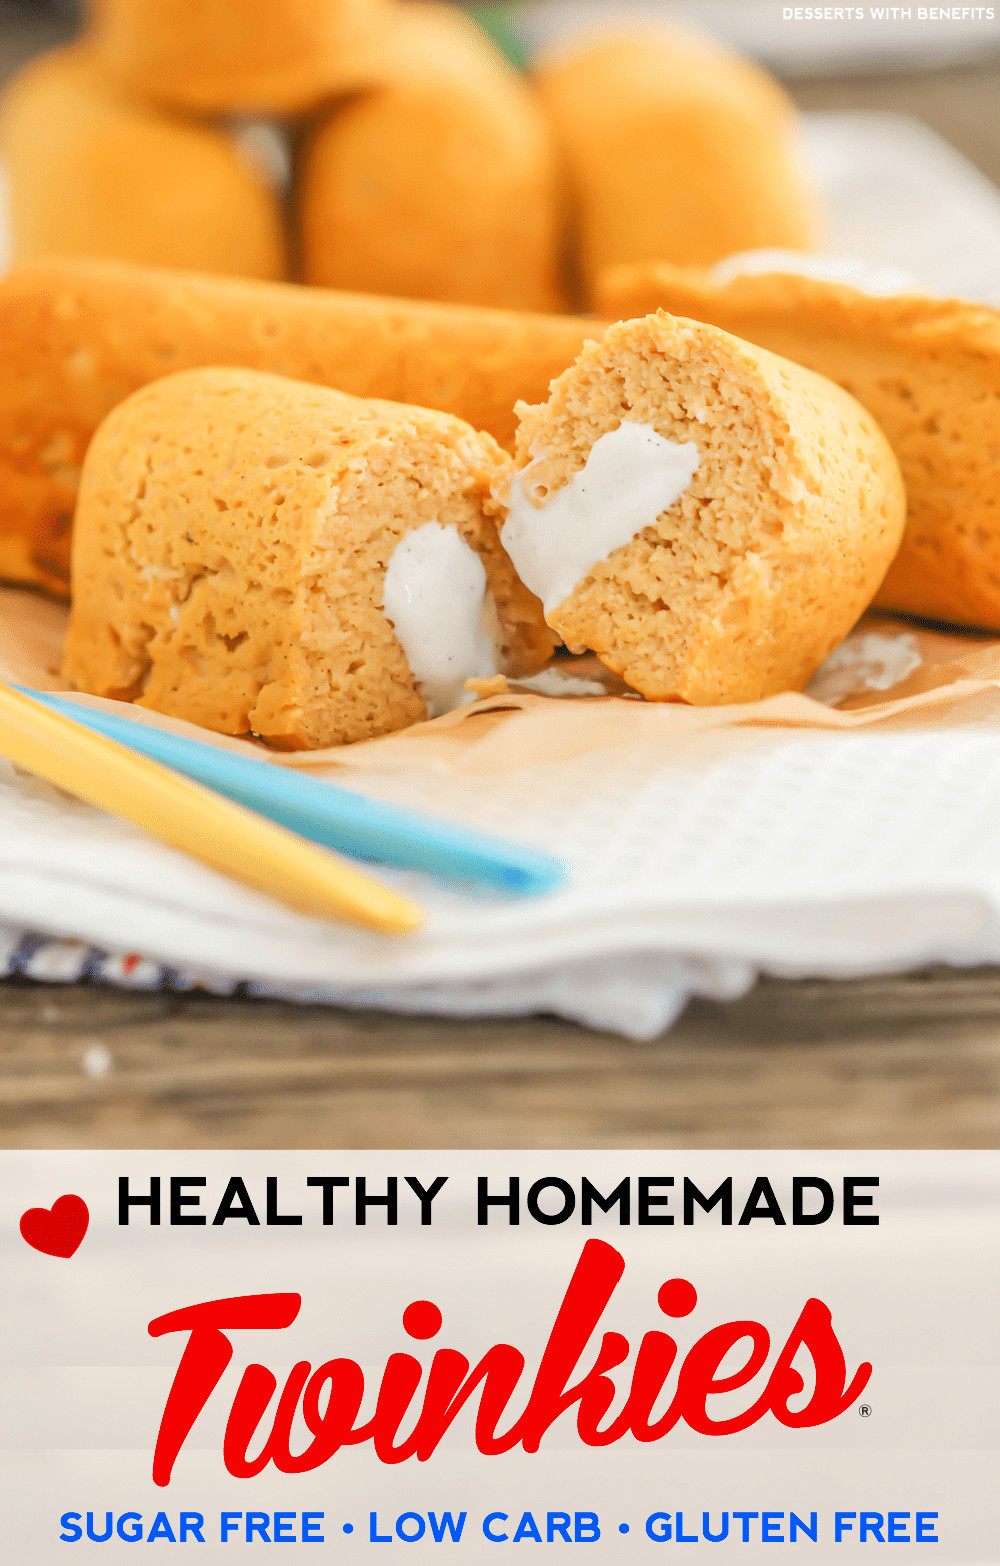 Healthy Sugar Free Desserts
 Desserts With Benefits Healthy Homemade Twinkies recipe